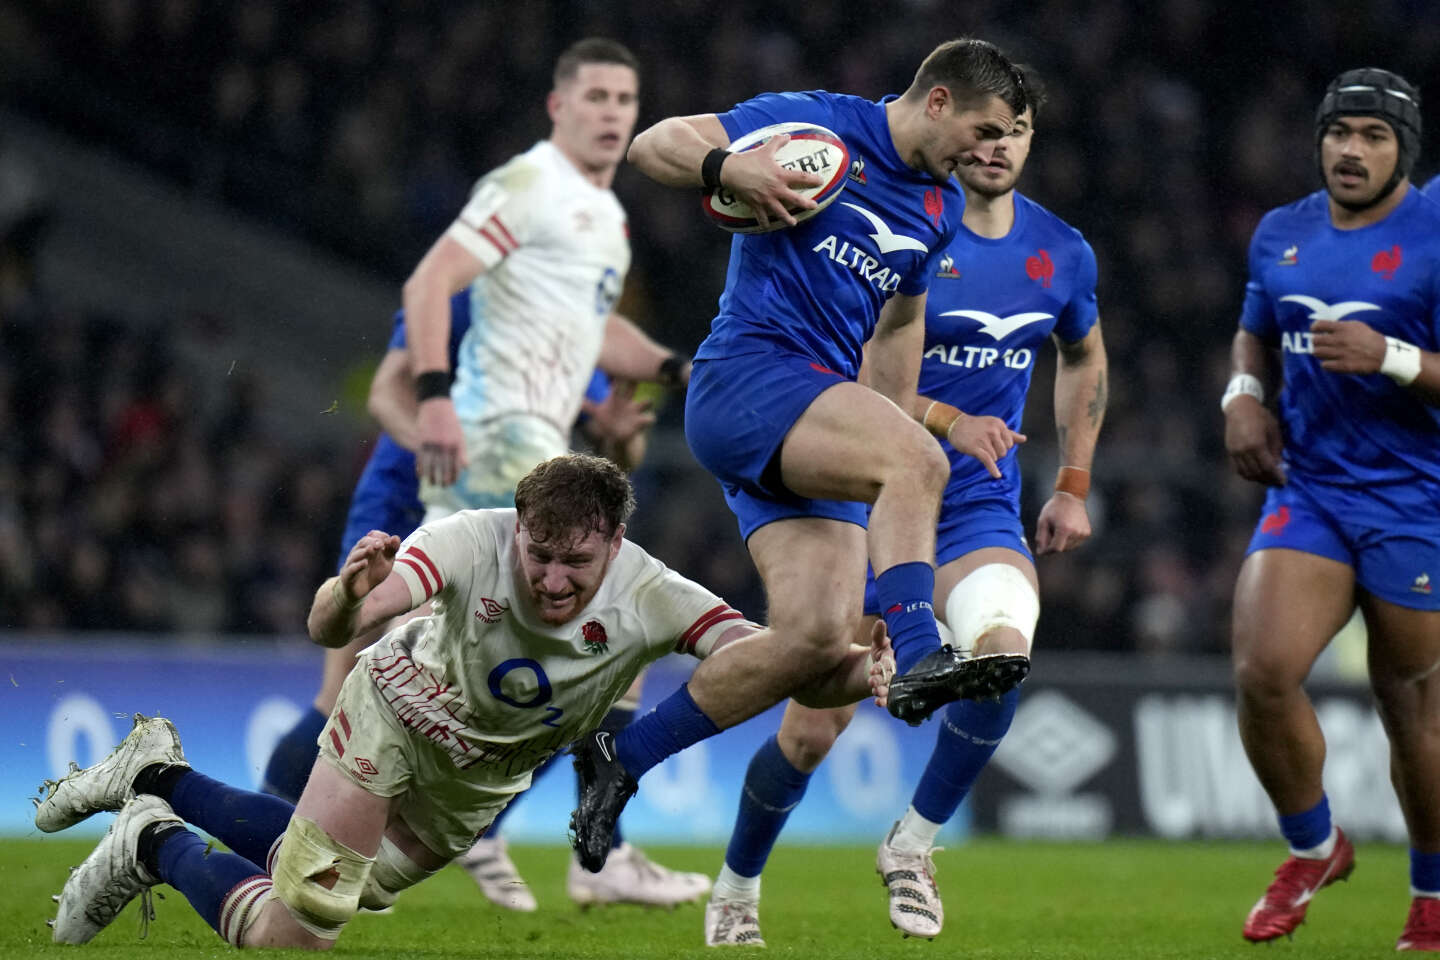 France humiliates England in record 53-10 win in Six Nations